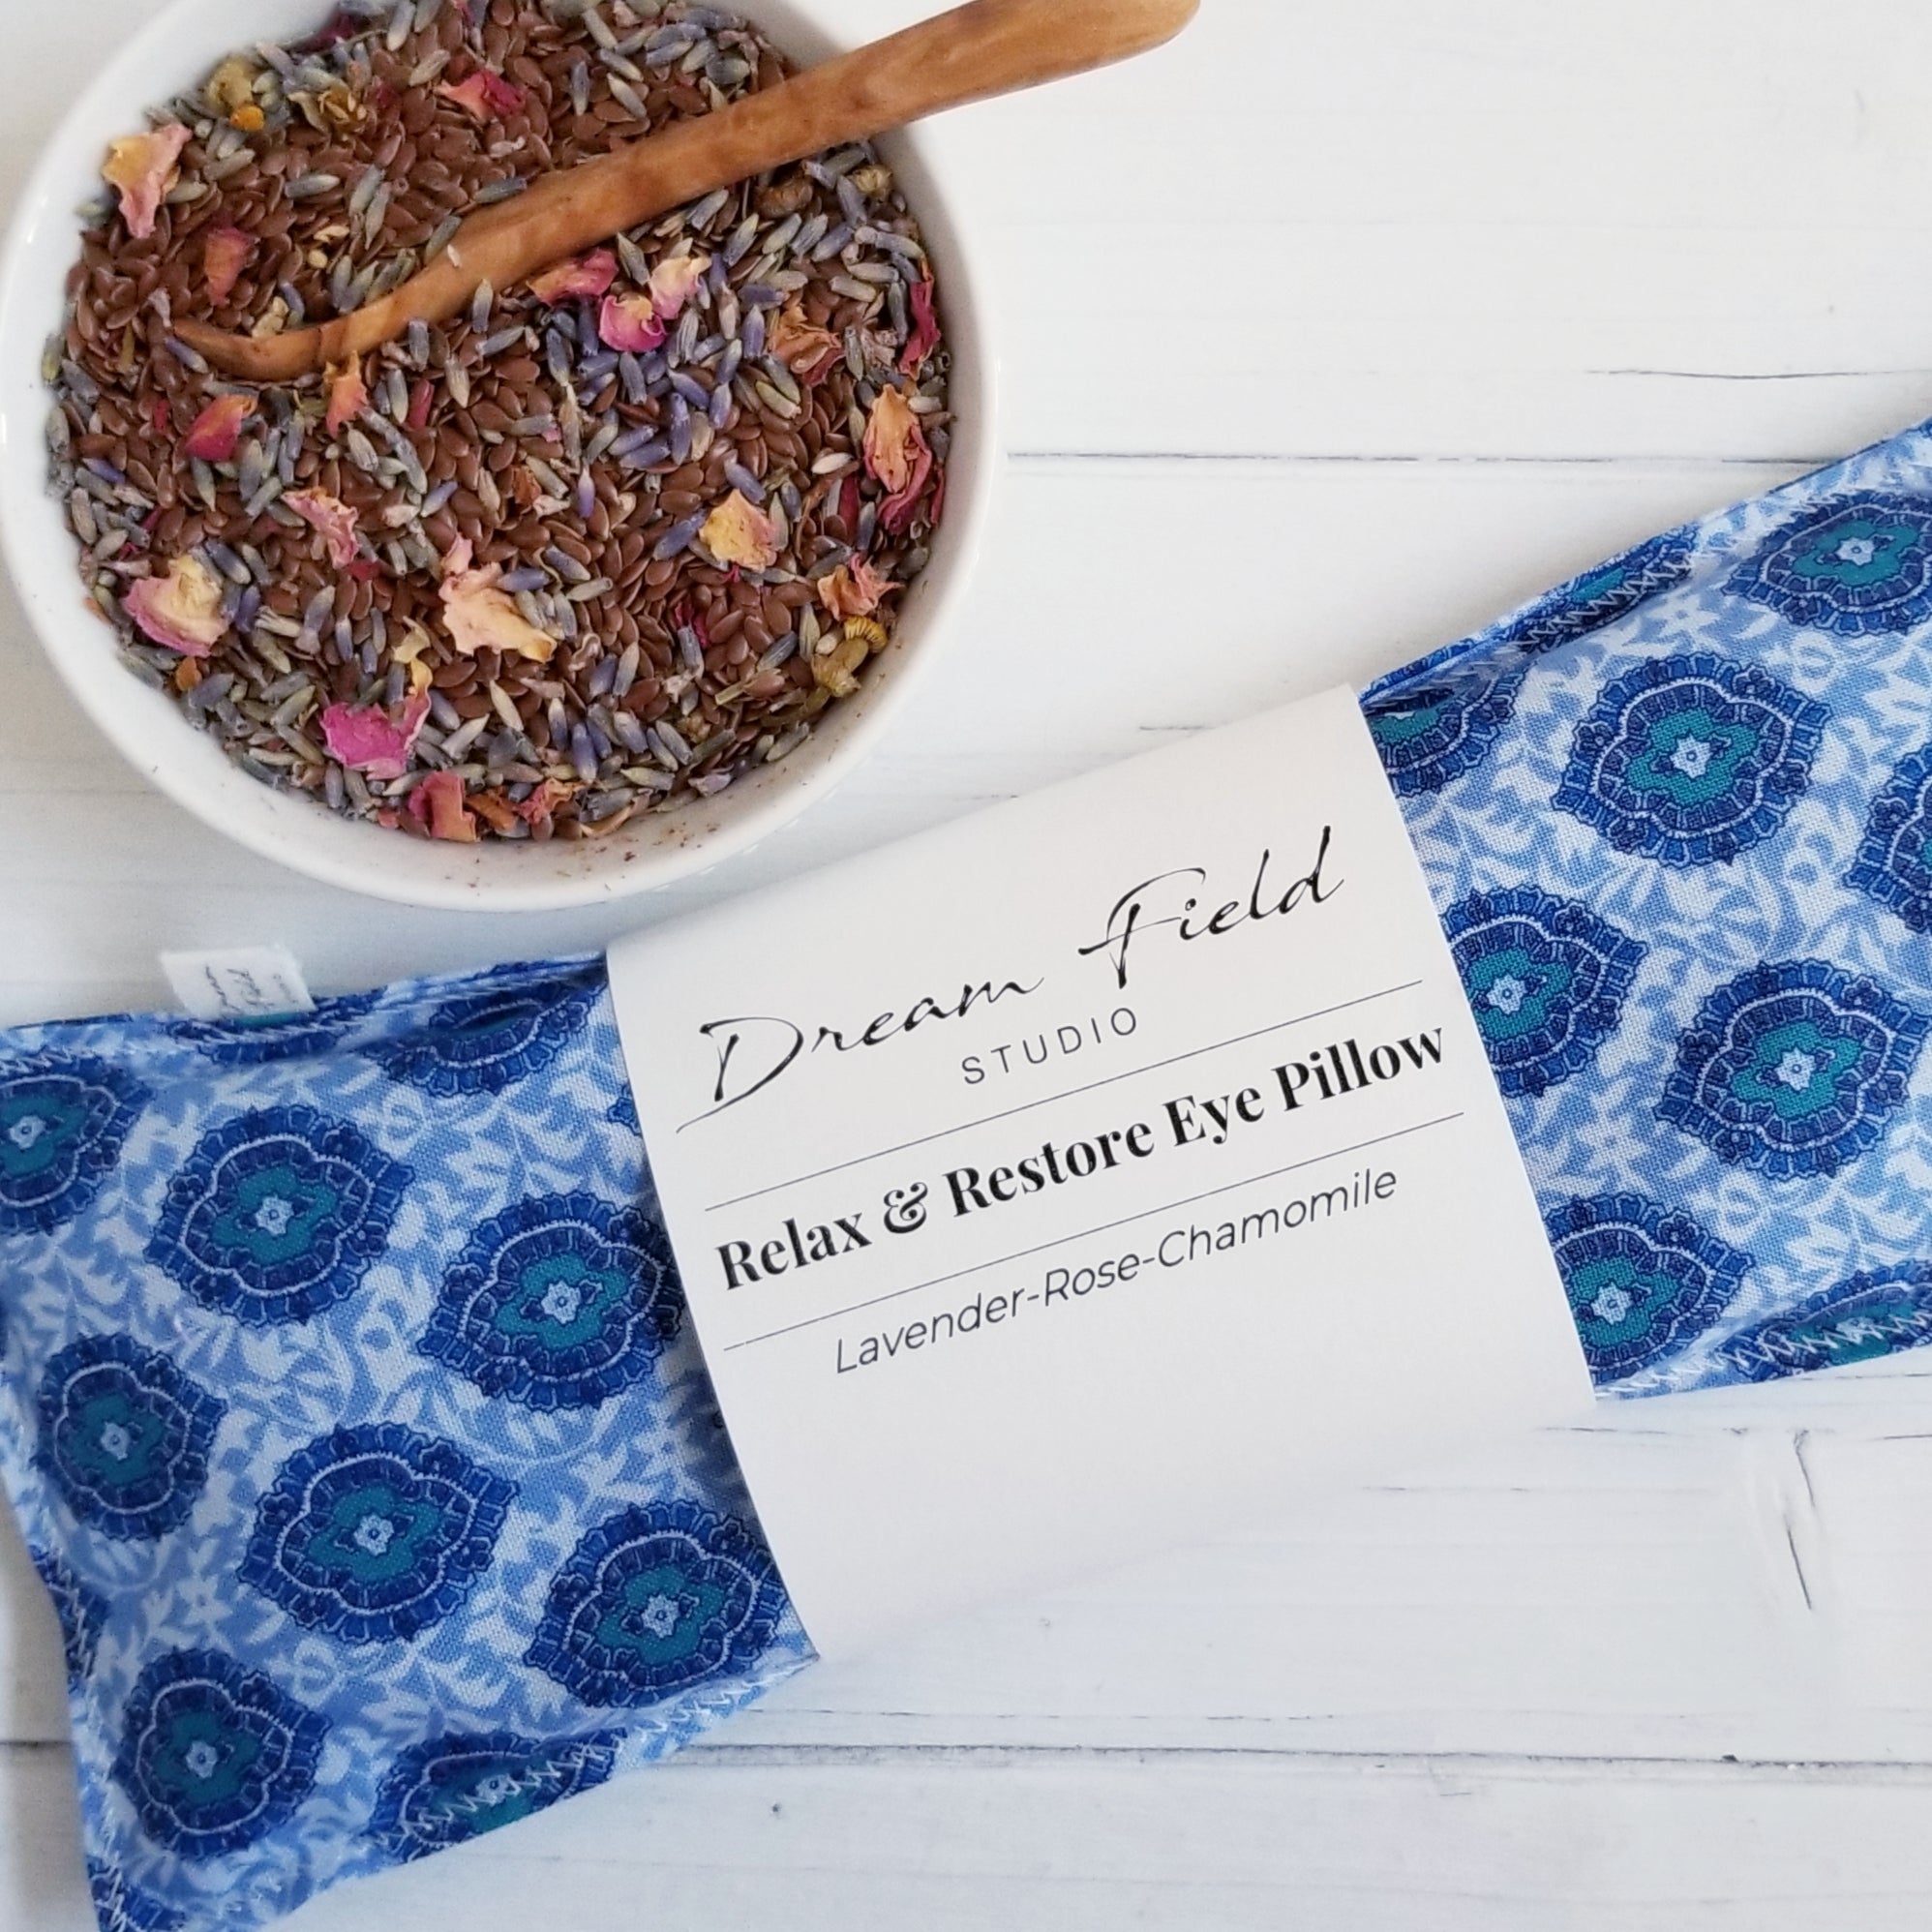 Lavender-Rose-Chamomile eye pillow shown in French Blue Indienne Pattern with bowl of lavender buds and flax seeds